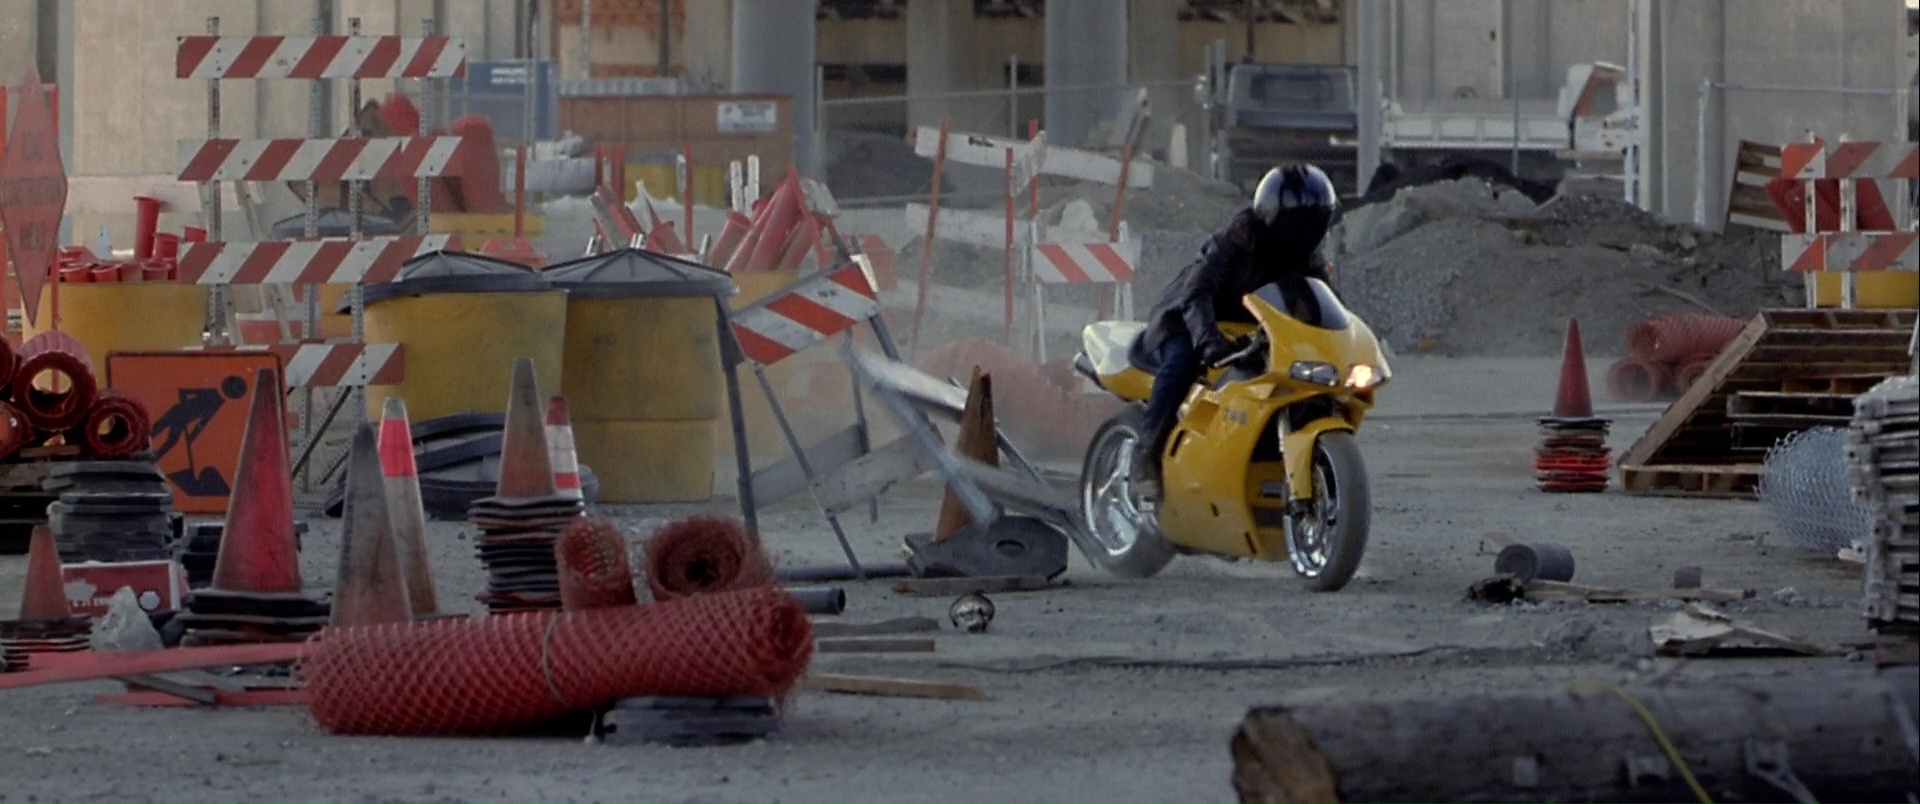 Ducati 748 Motorcycle Used by Seth Green in The Italian Job 2